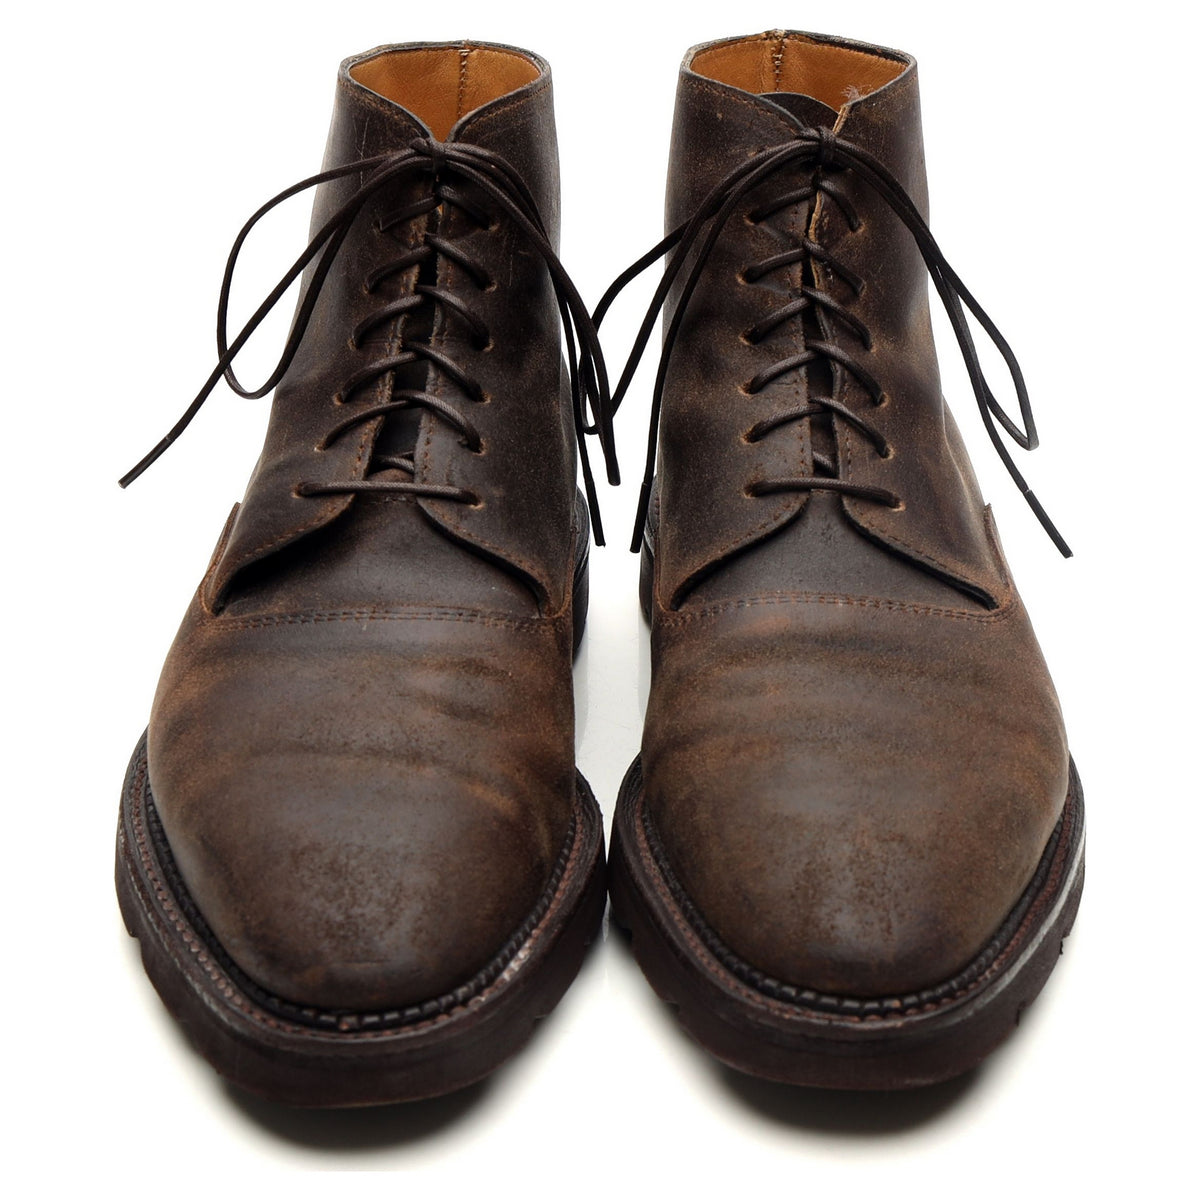 &#39;Forge&#39; Dark Brown Waxed Suede Boots UK 7 E